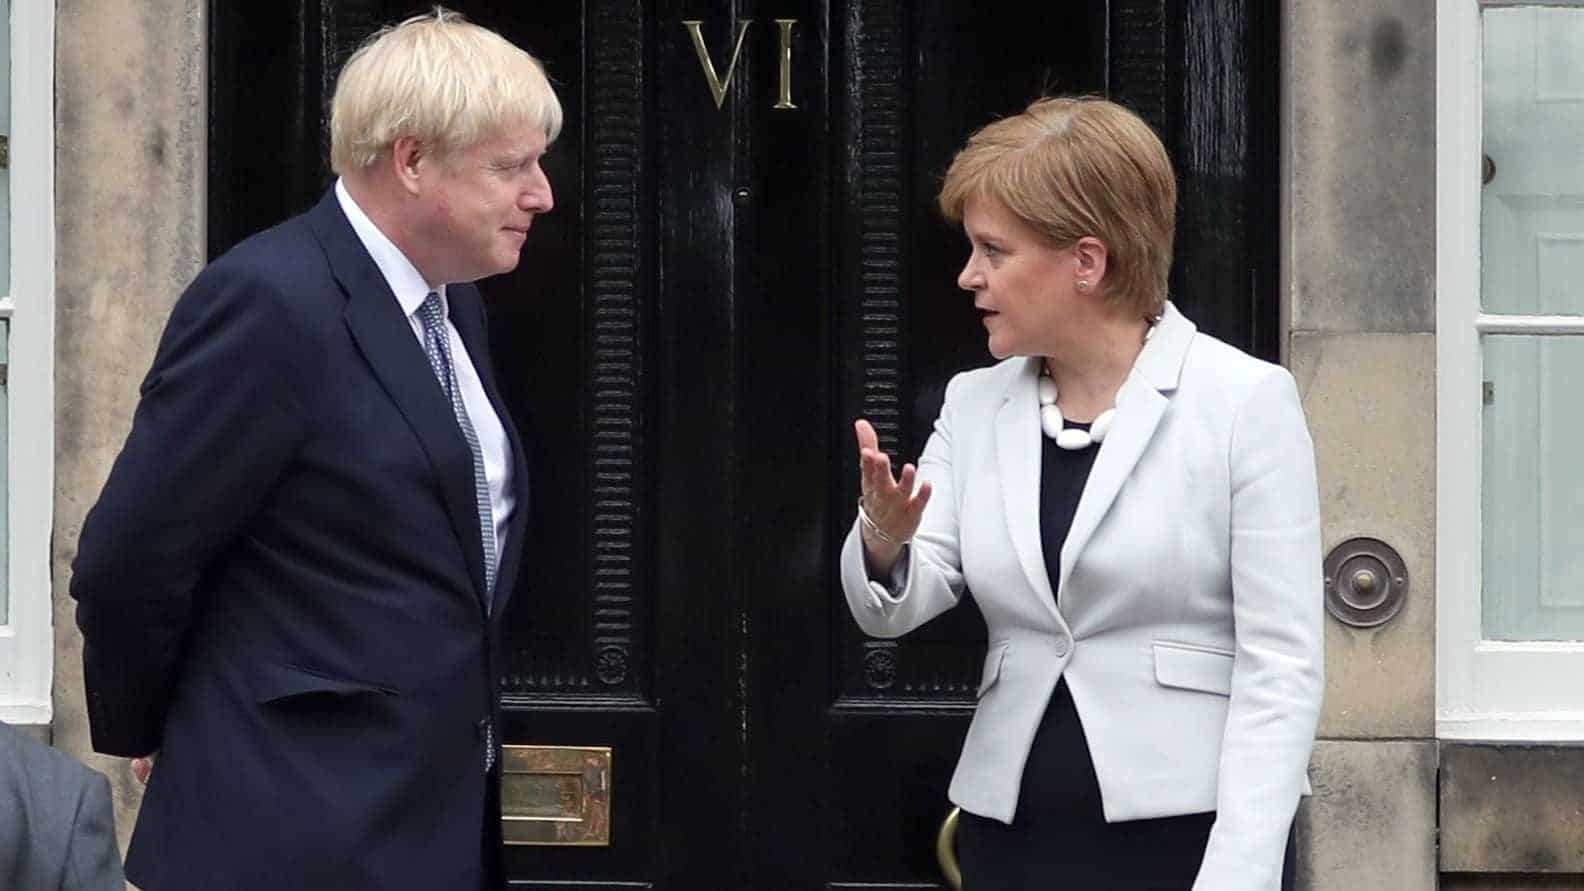 Johnson: “I don’t want to see Sturgeon anywhere near” Glasgow climate summit